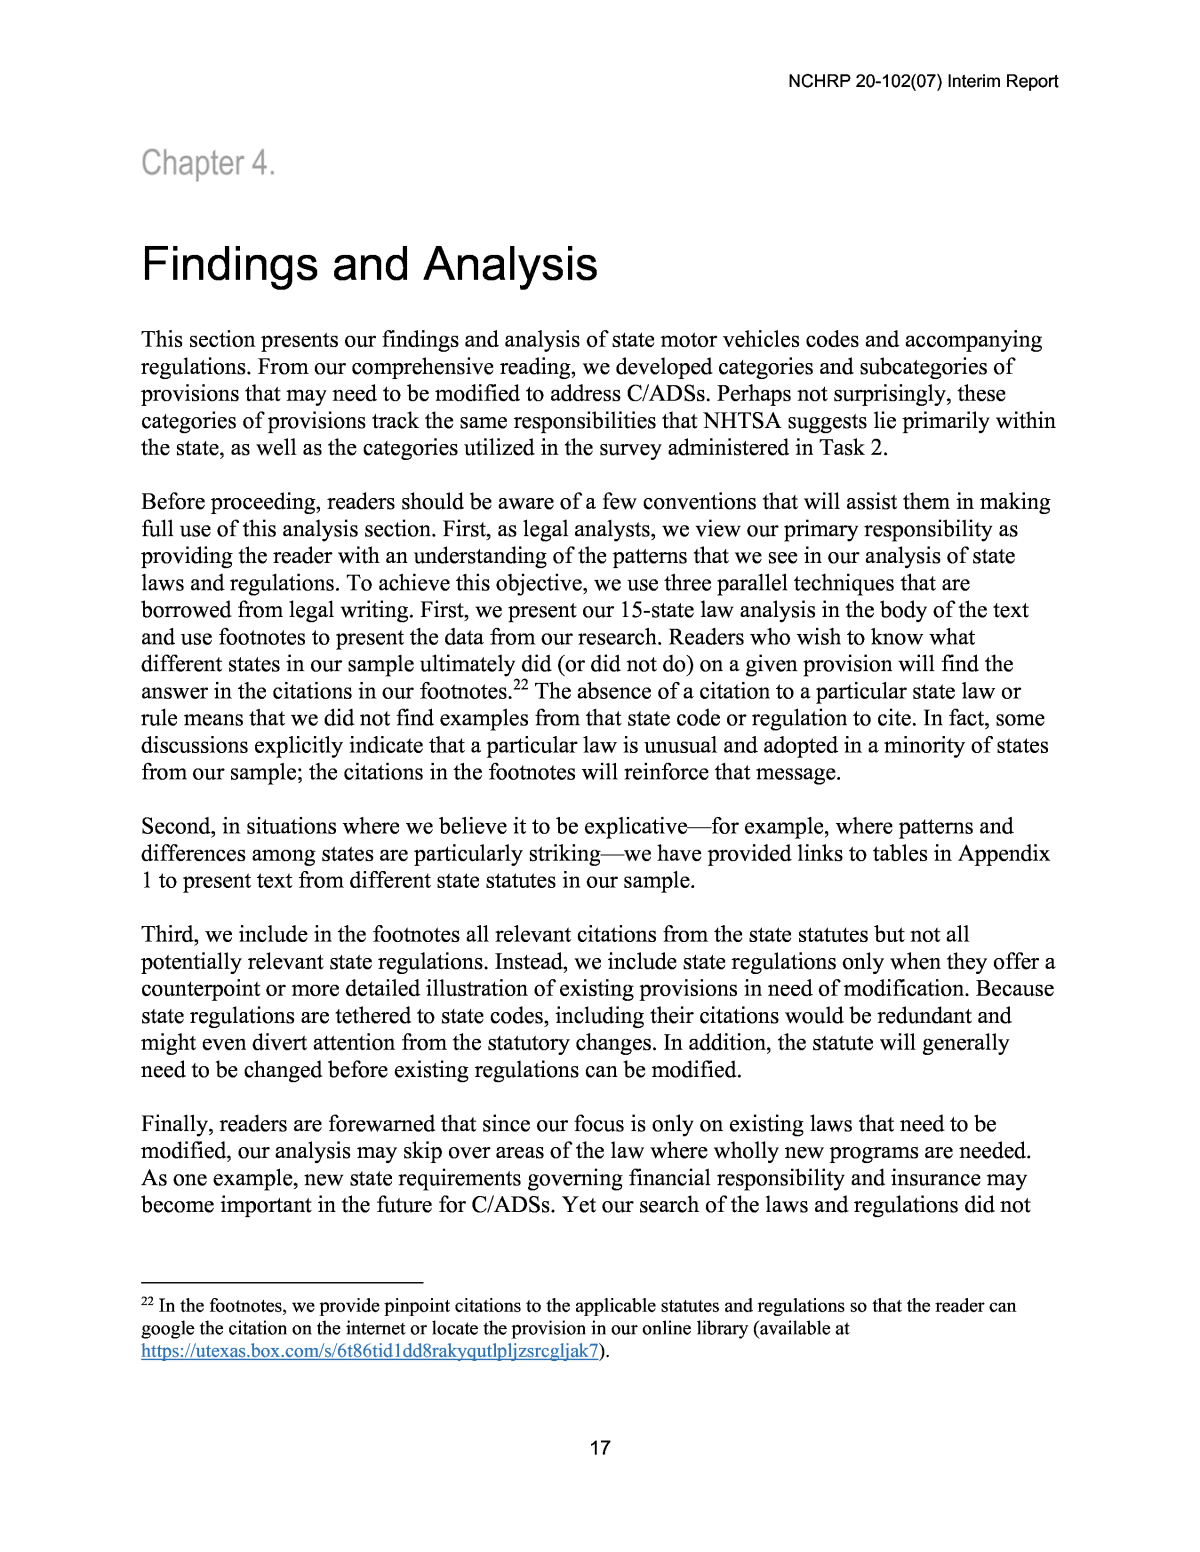 analysis and research findings